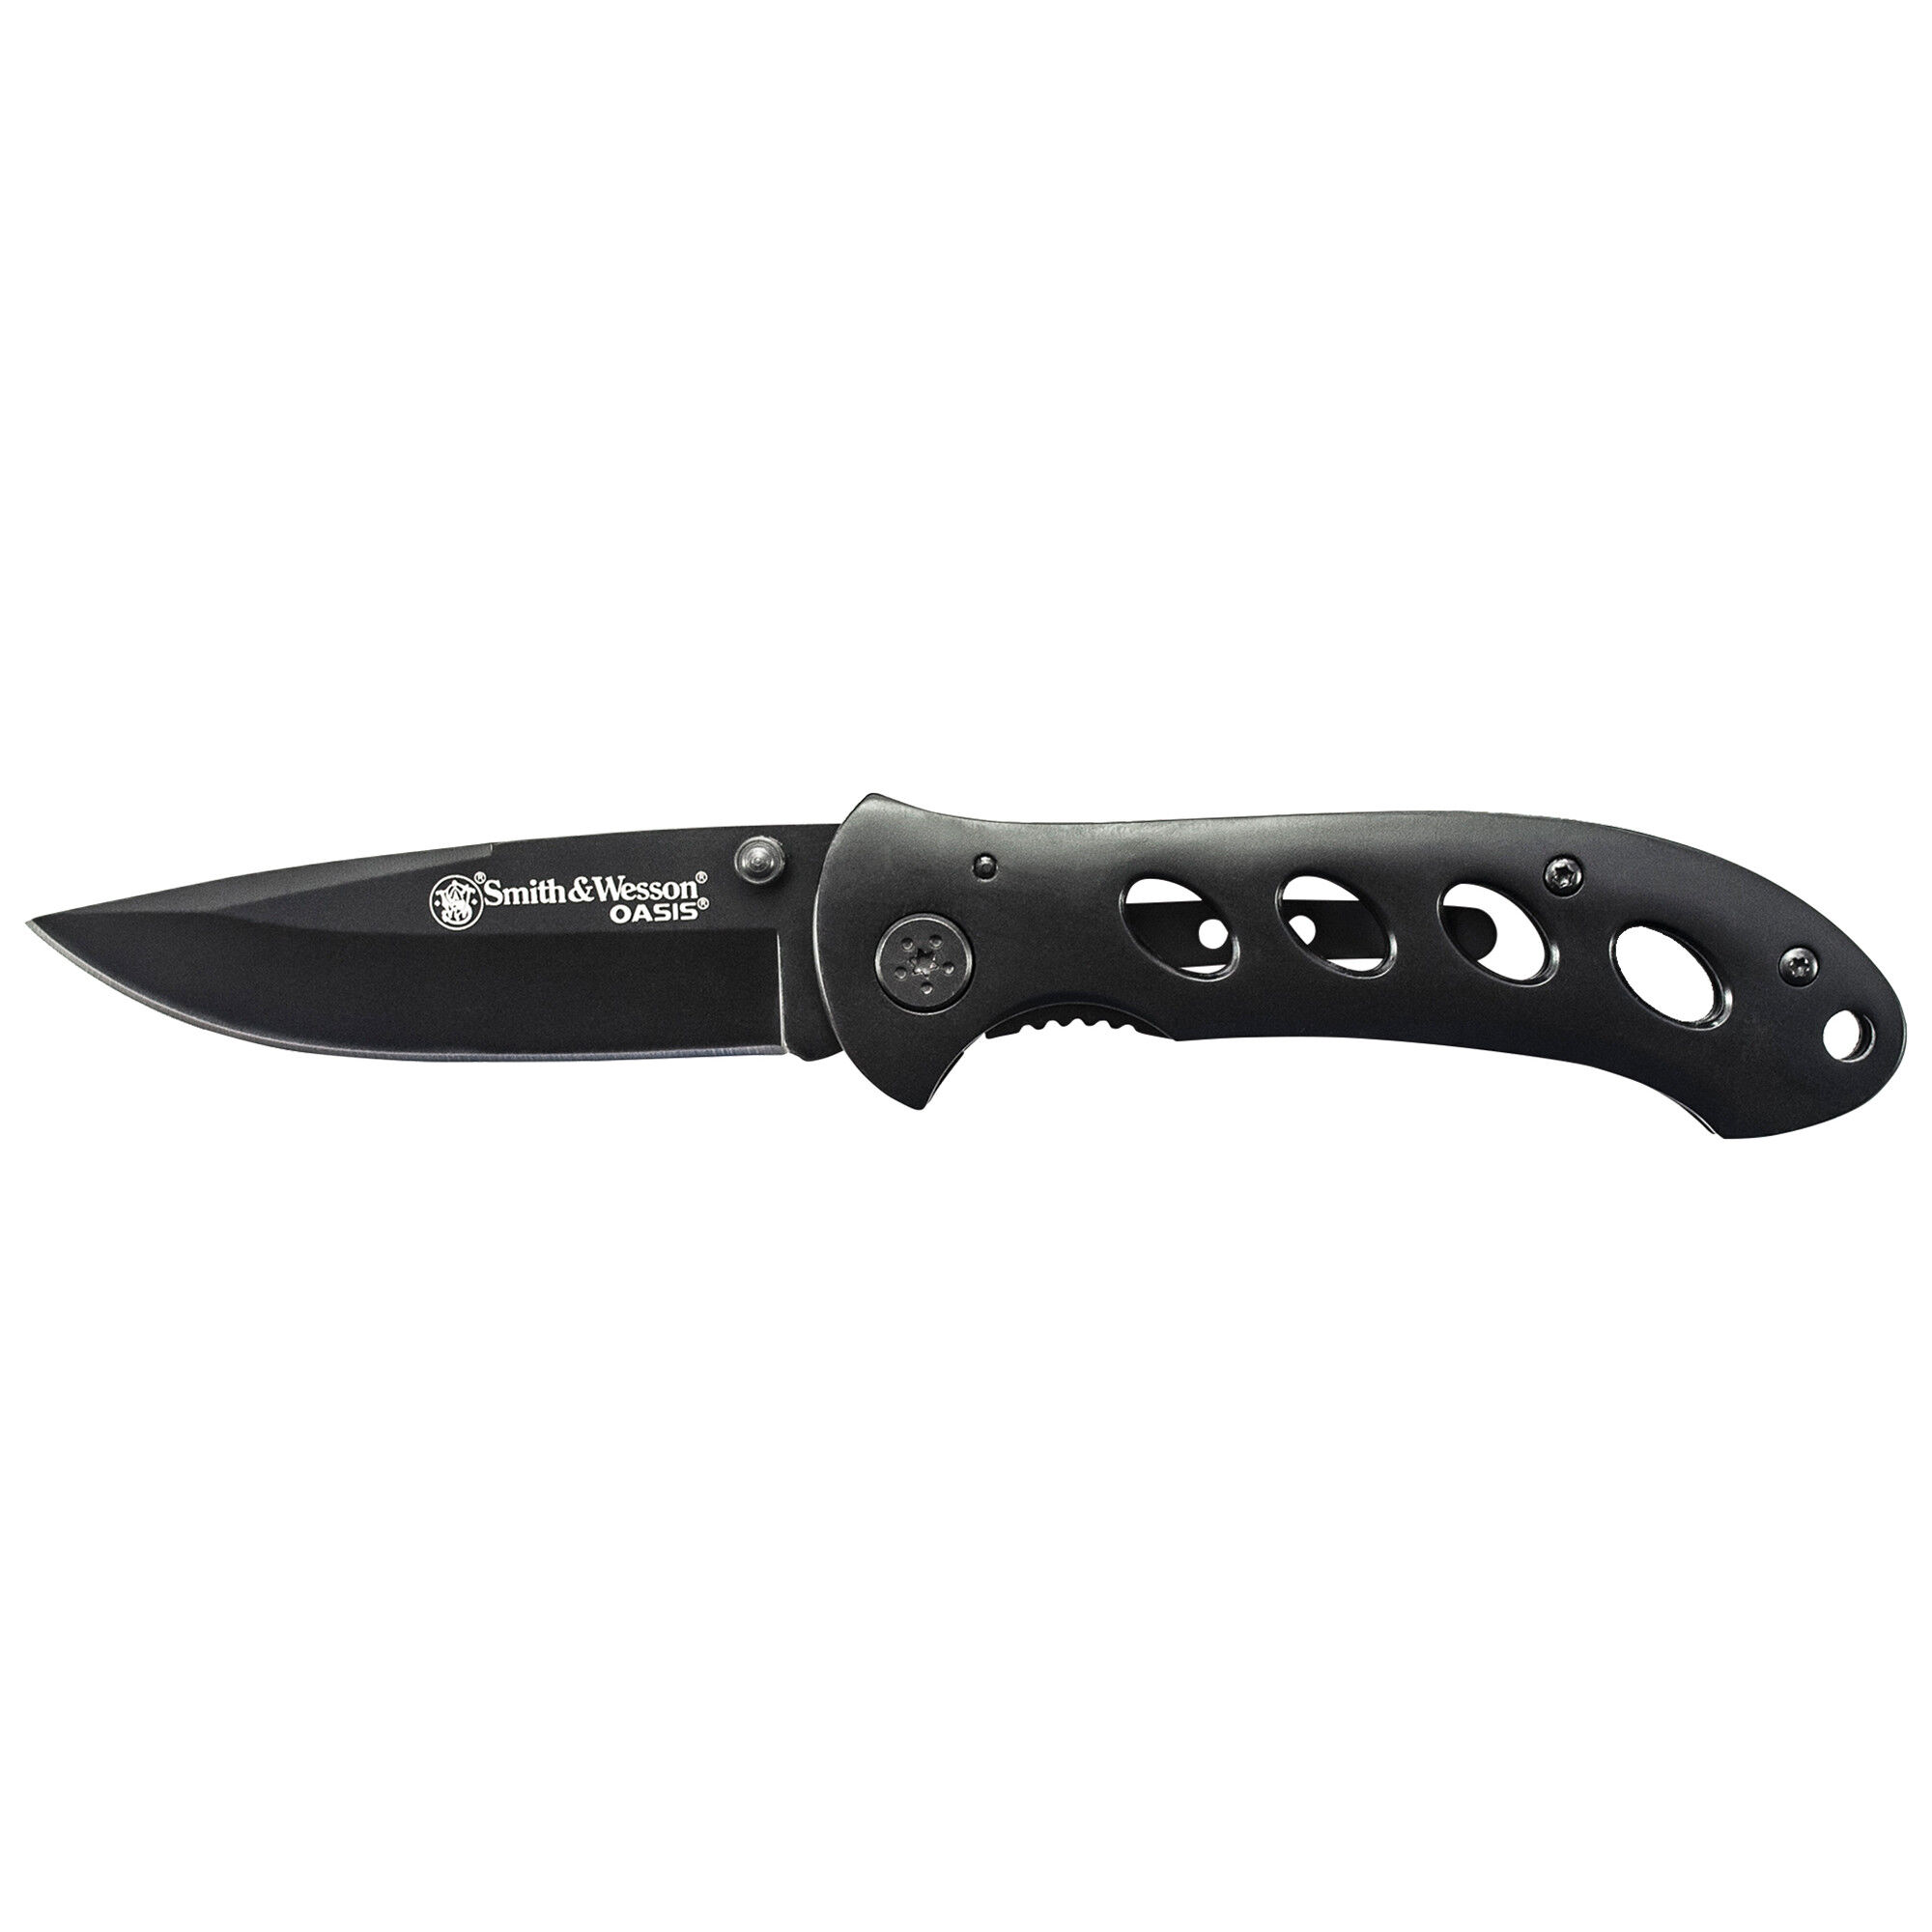 Smith  Wesson® SW423B Oasis Liner Lock Drop Point Folding Knife | Smith   Wesson